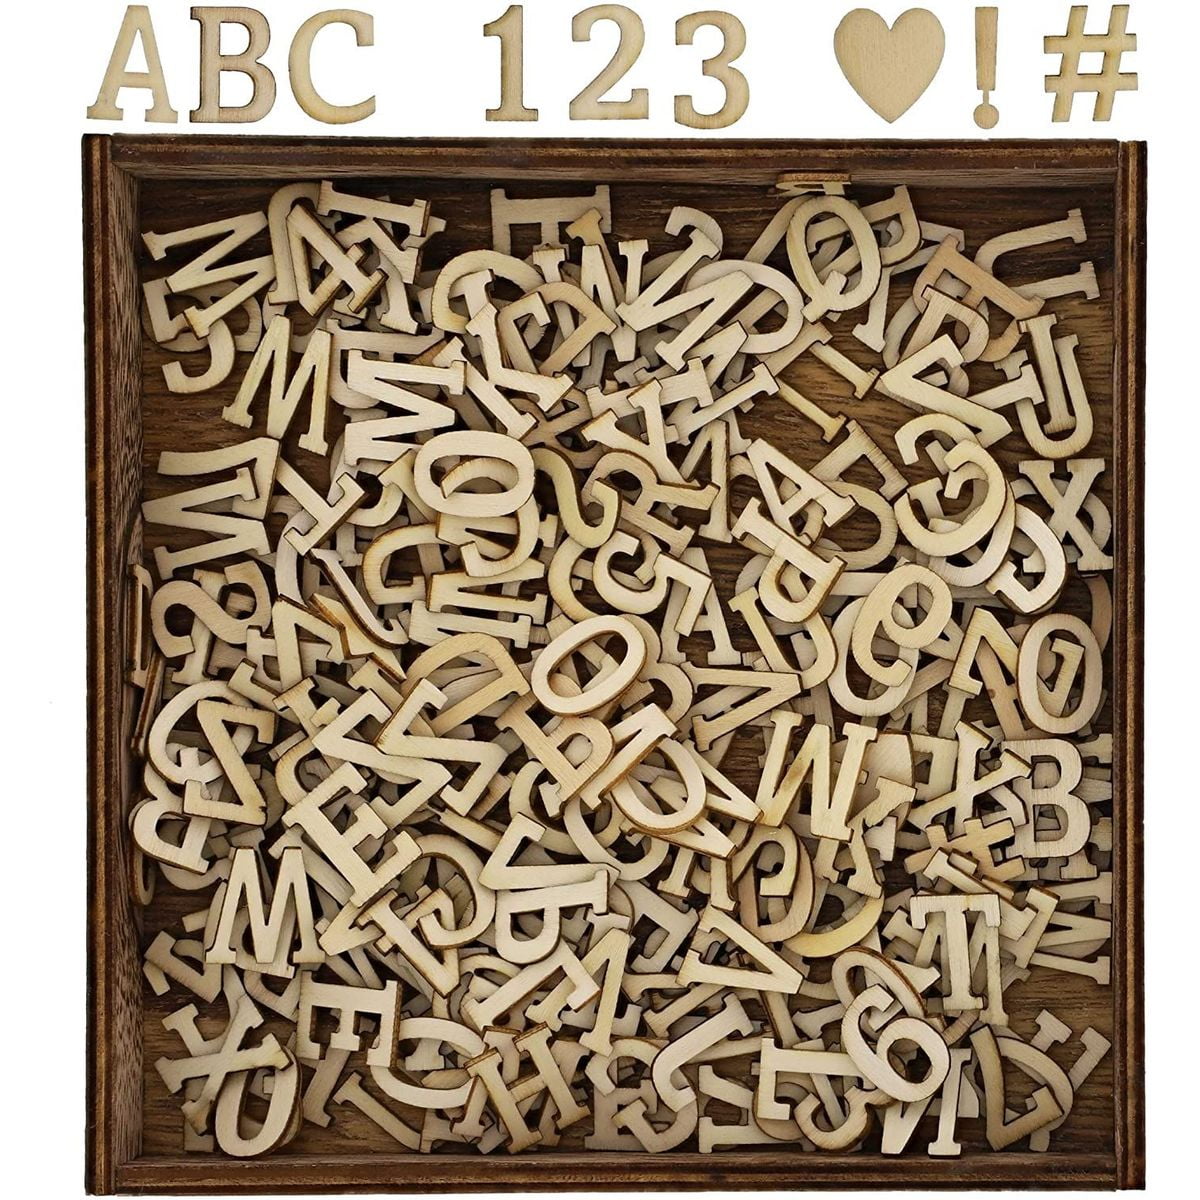 A-Z, 0-9 Wooden Board Large Alphabets and Numbers Symbol 